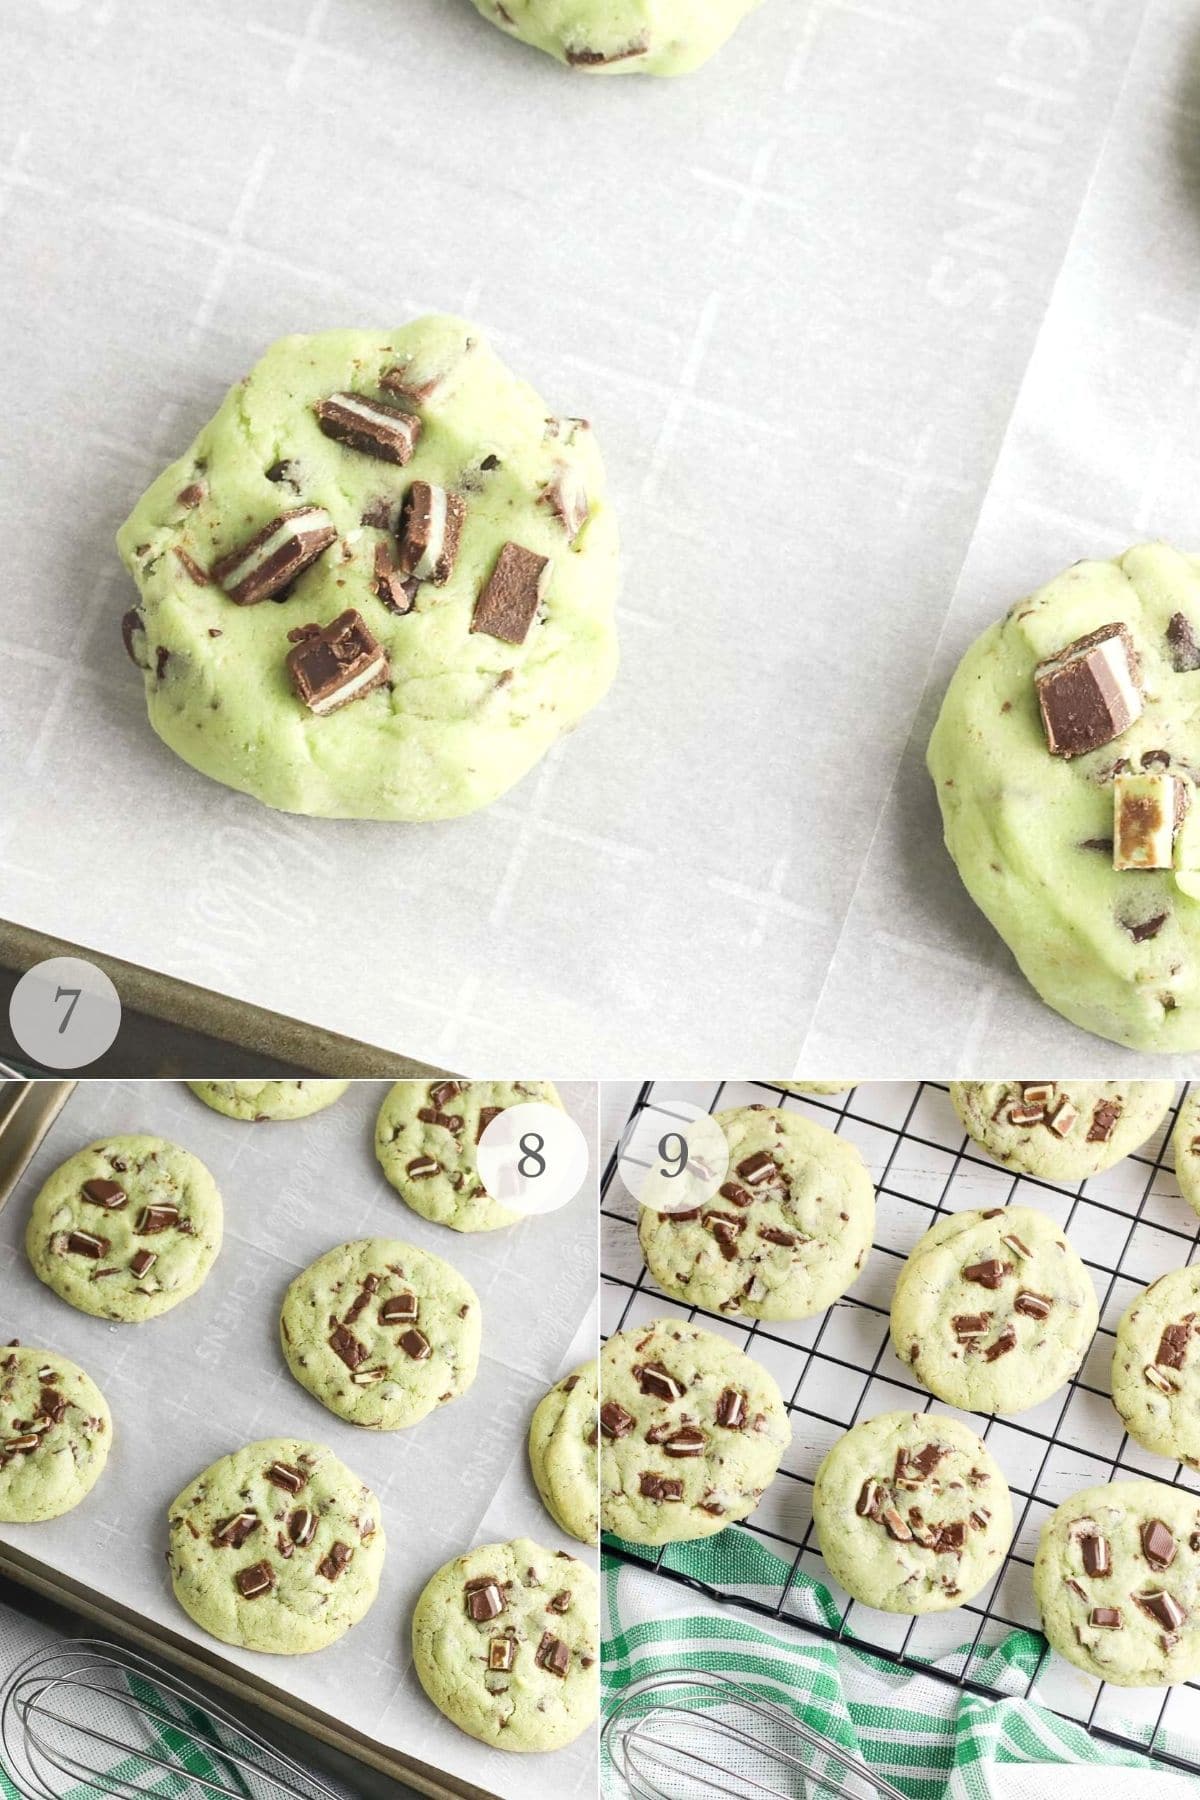 mint chocolate chip cookies recipe steps 7-9